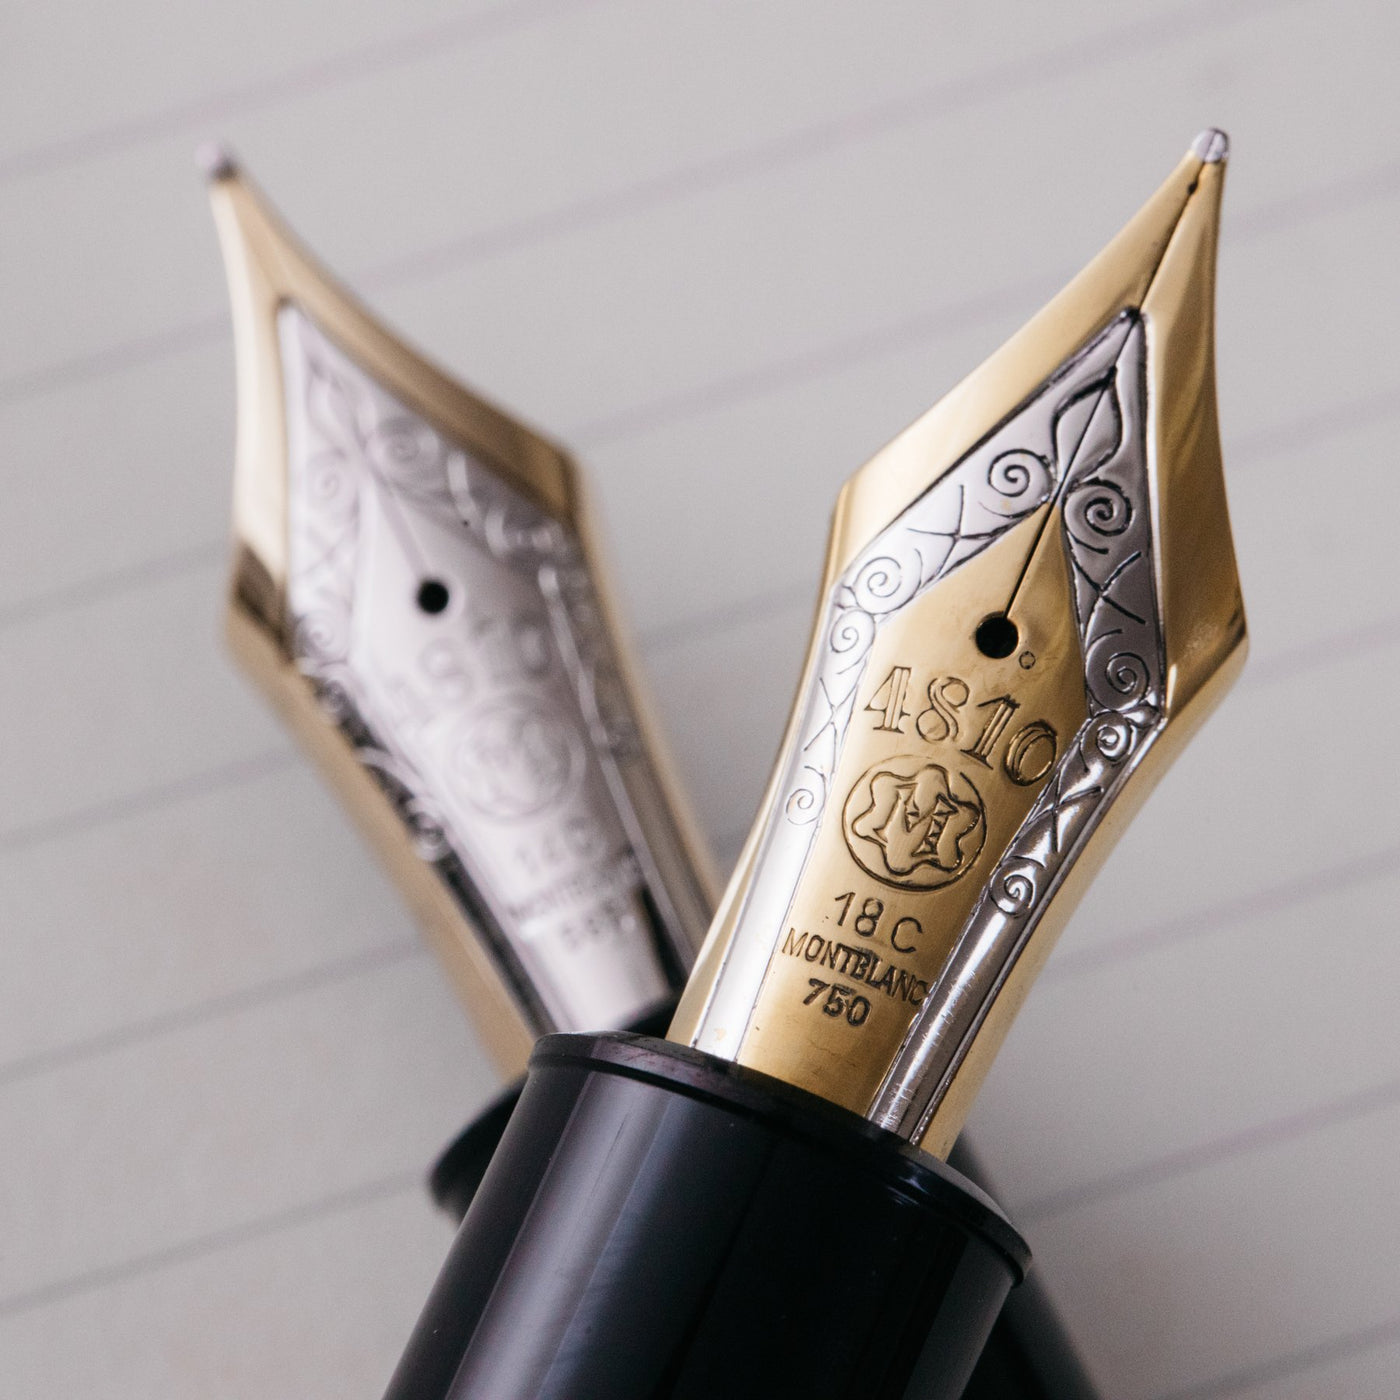 Quest For My Ultimate Fountain Pen Part 3: The Luxury Brand Period